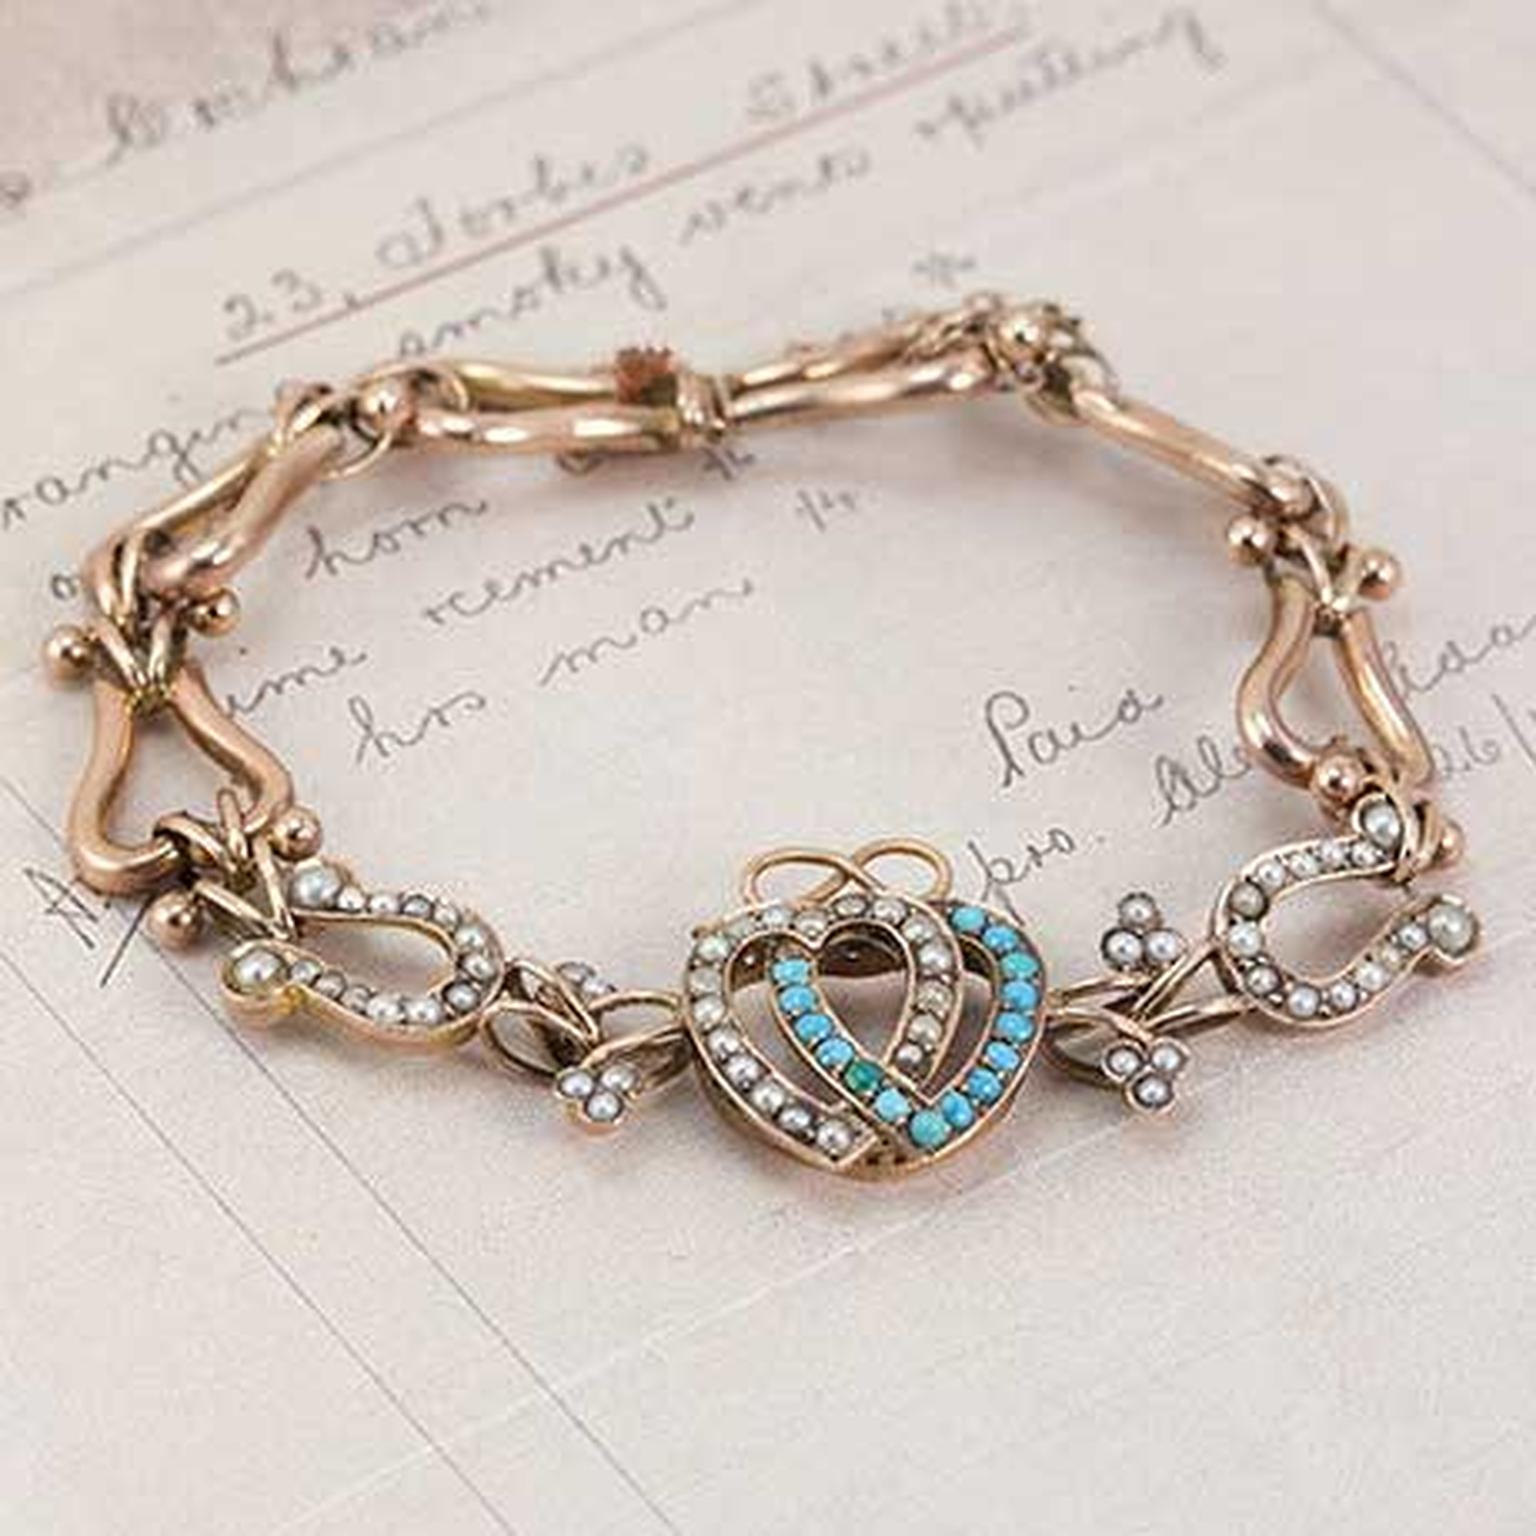 Victorian Erica Weinrad pearl and turquoise double heart bracelet